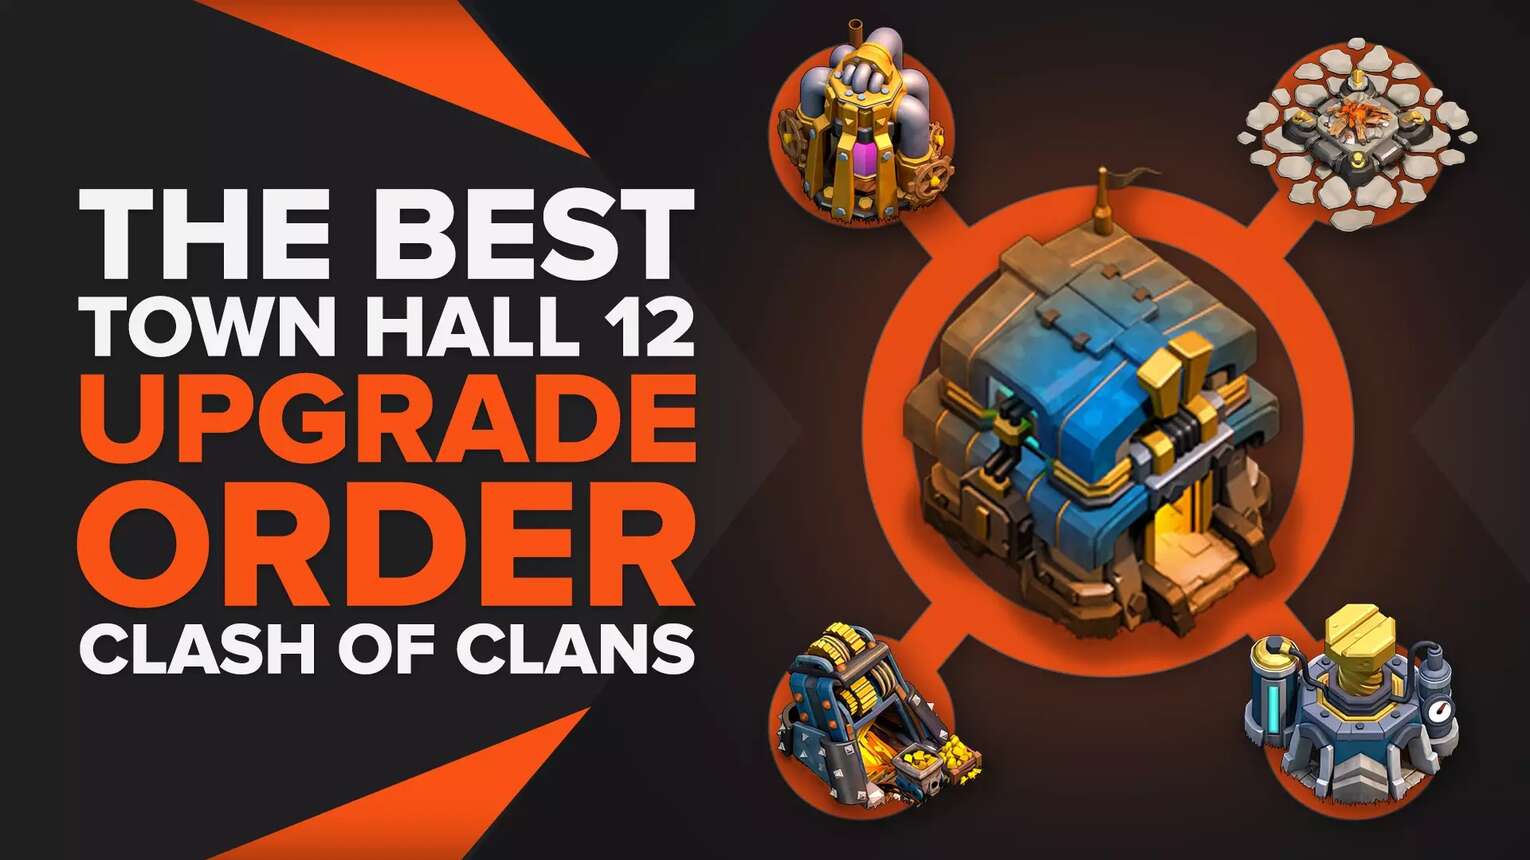 Best Town Hall 12 Upgrade Order In Clash Of Clans [Analyzed]